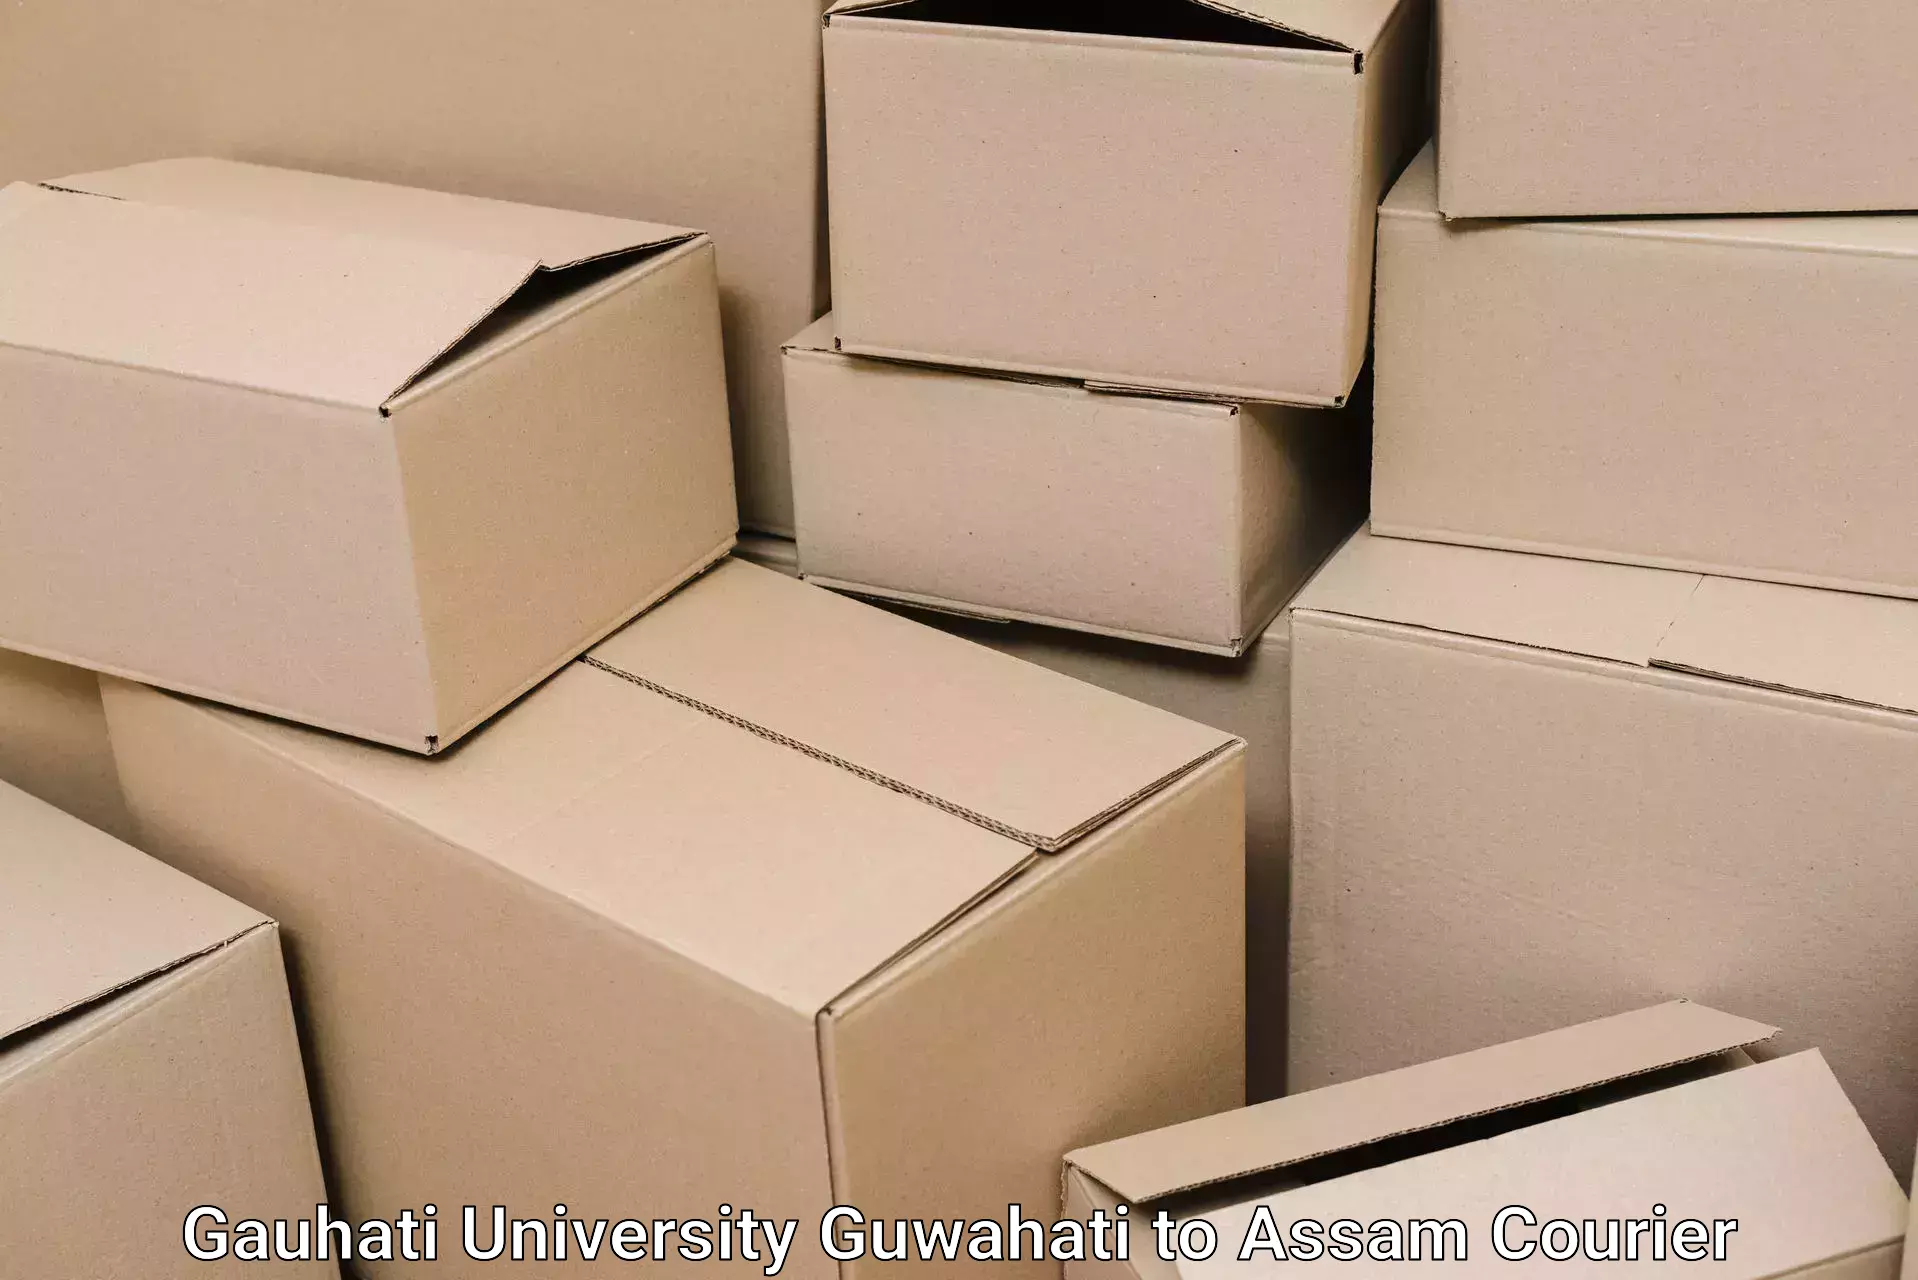 Packing and moving services Gauhati University Guwahati to Tezpur